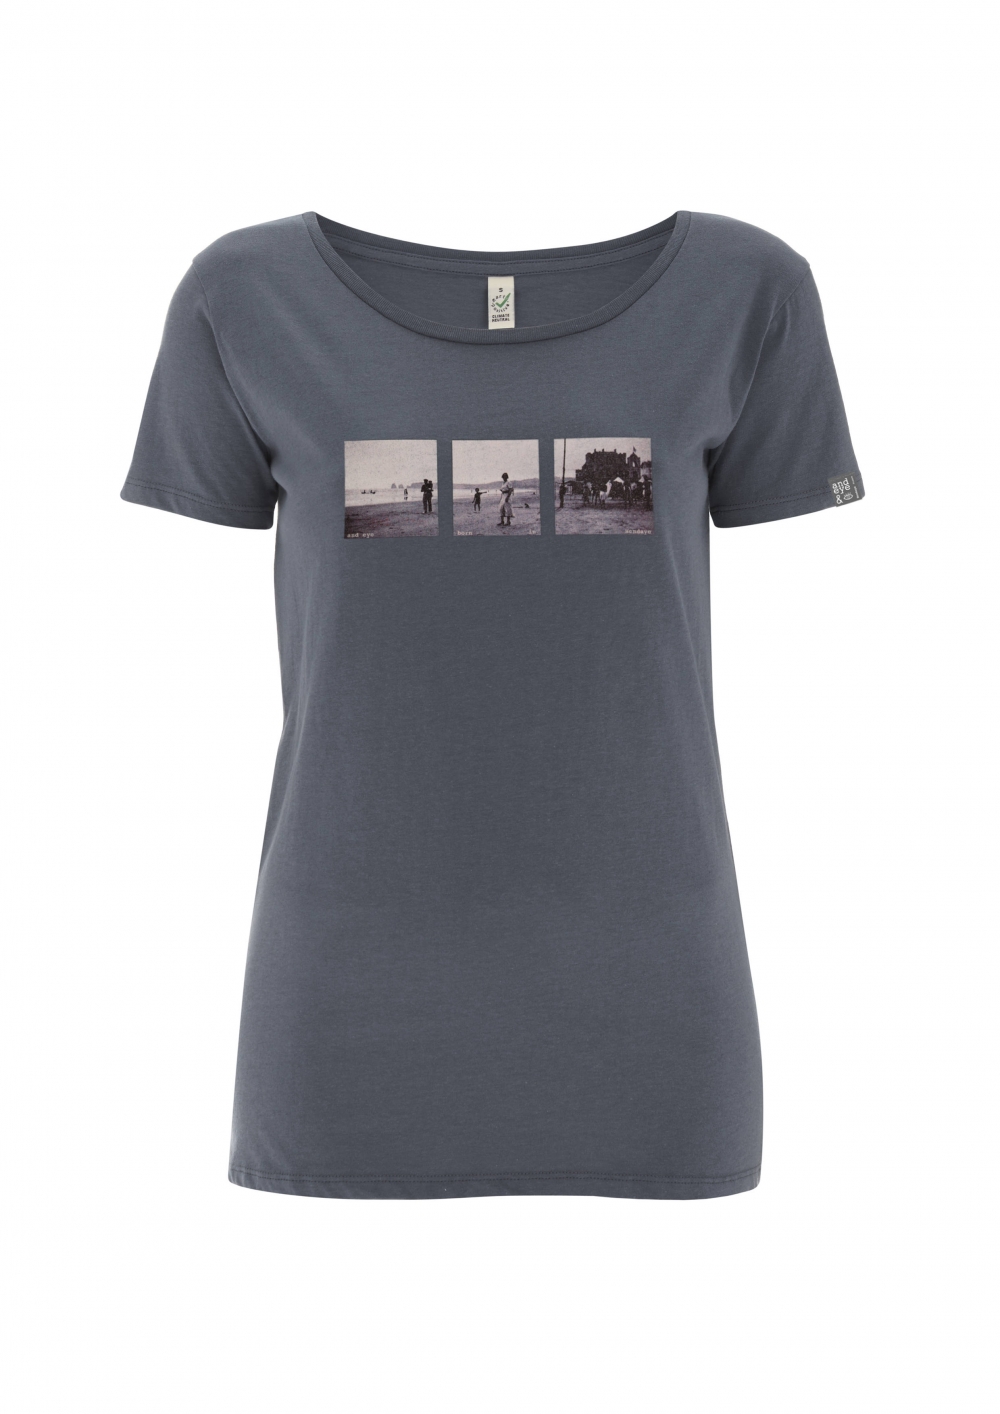 Women's open neck t-shirt wiht vintage image of French Basque country